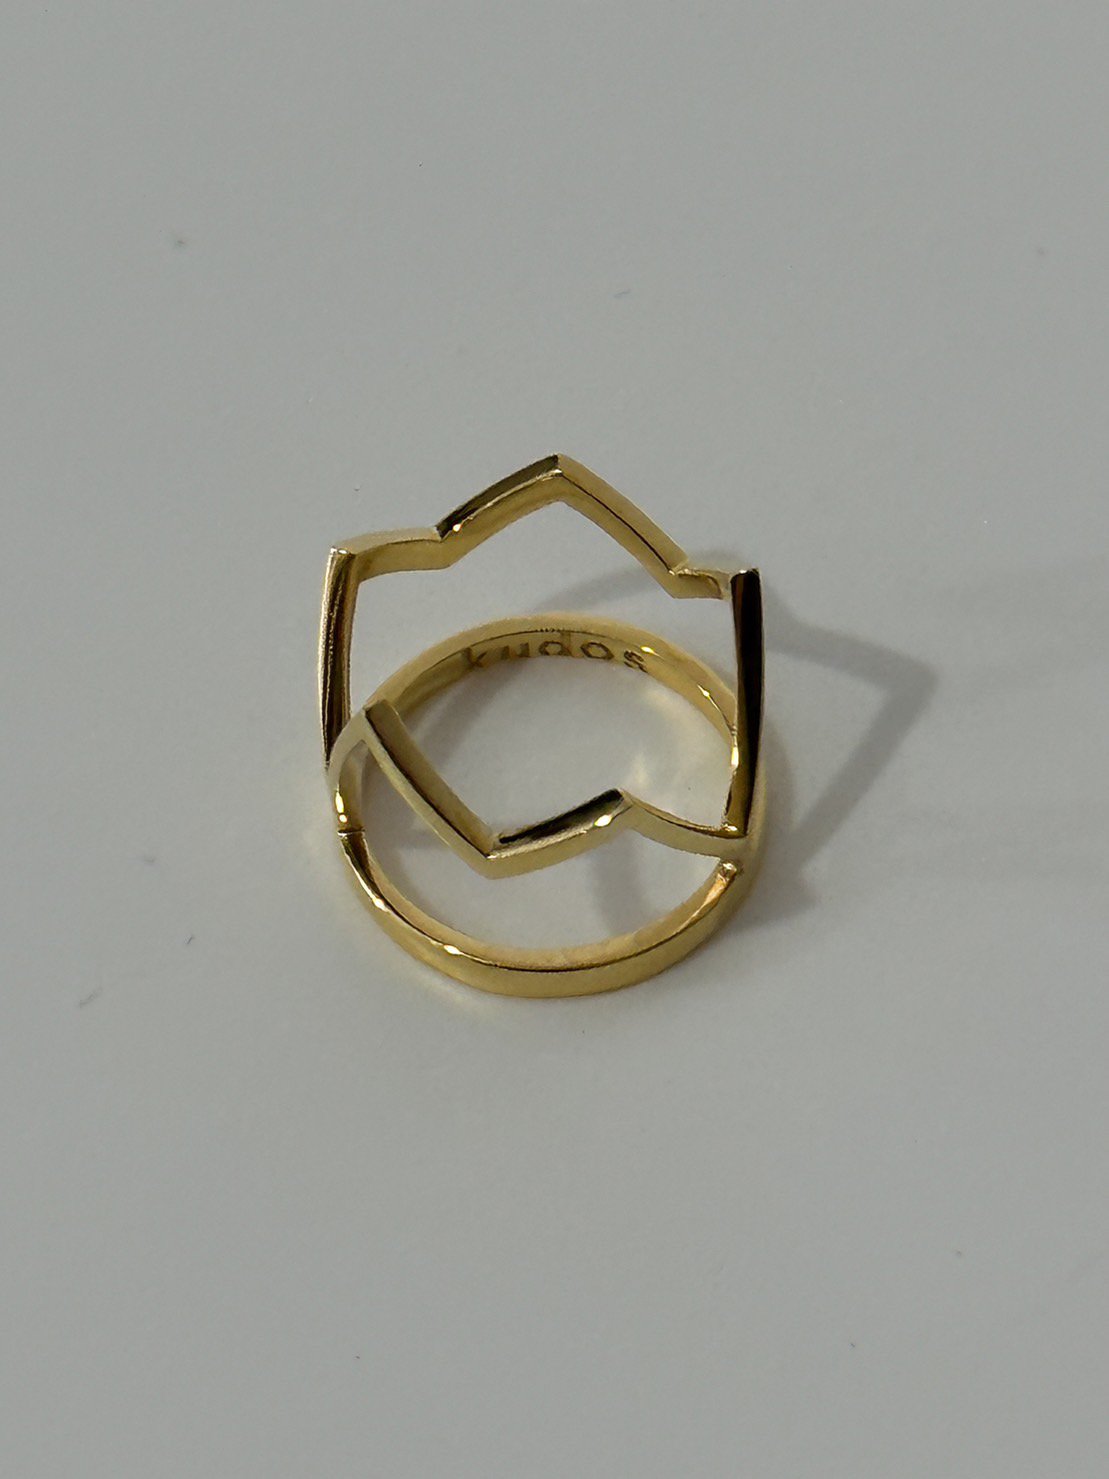 kudos<br />CROWN RING / GOLD<img class='new_mark_img2' src='https://img.shop-pro.jp/img/new/icons14.gif' style='border:none;display:inline;margin:0px;padding:0px;width:auto;' />